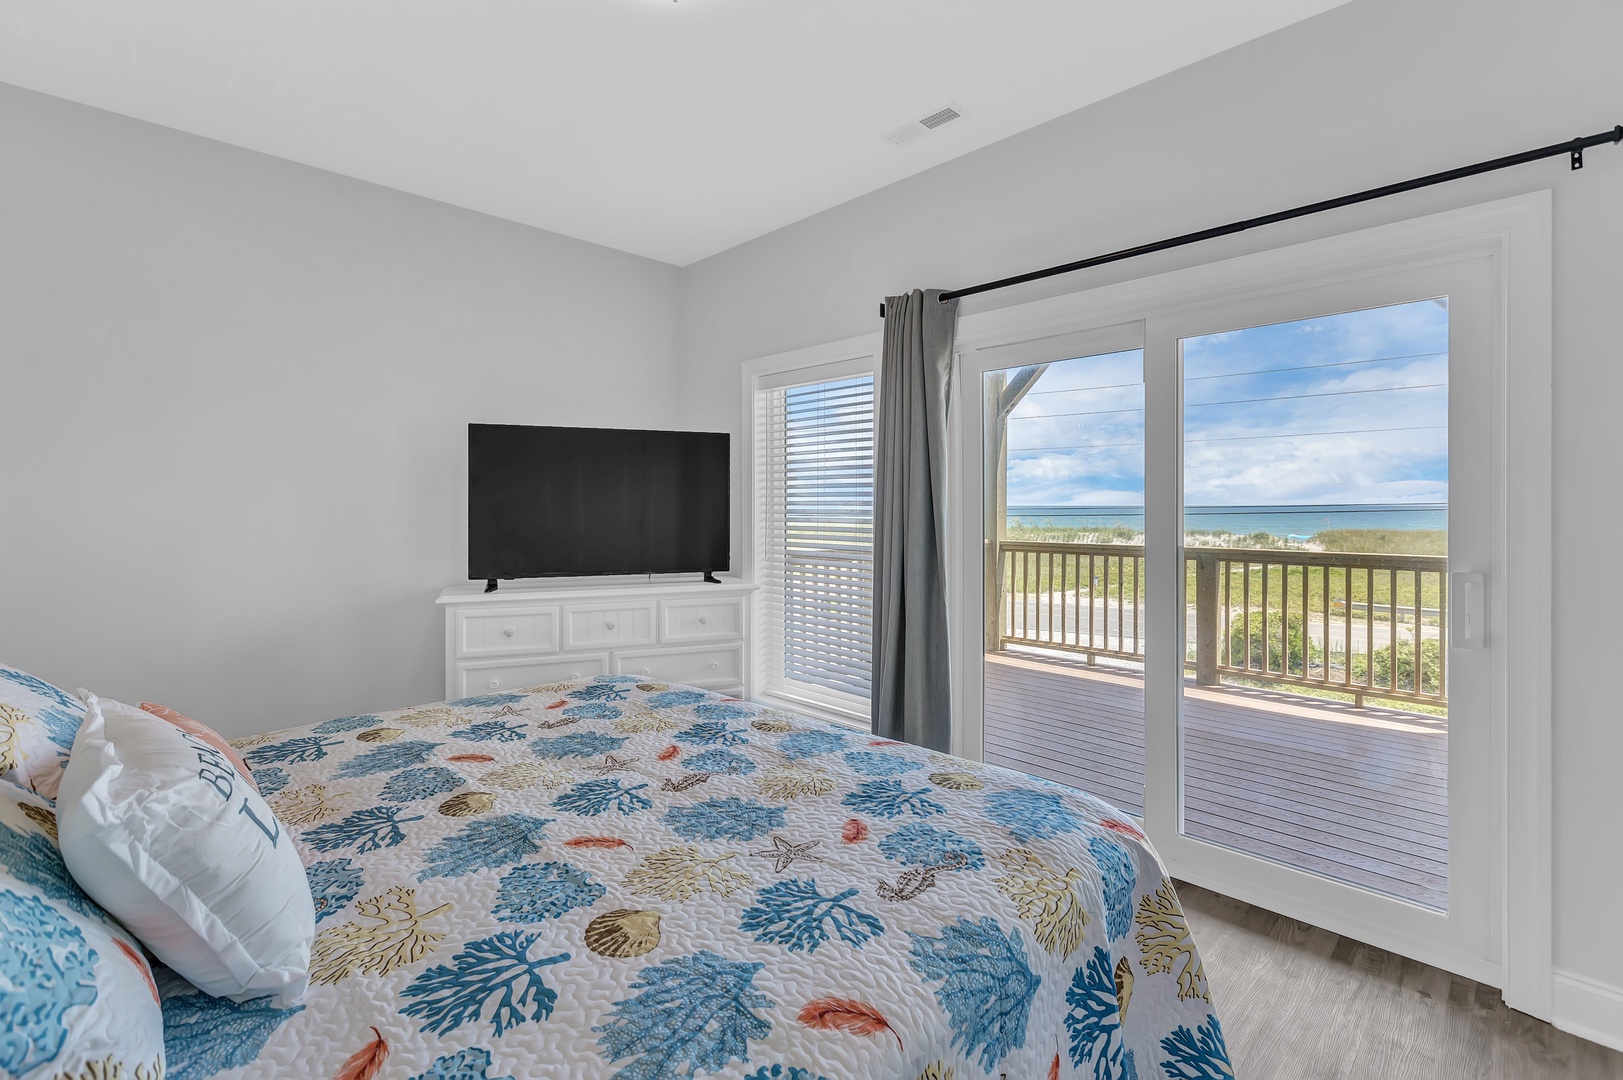 Guest bedroom with king-sized bed, Smart TV, access to a first-floor balcony with ocean views, and an attached bathroom.